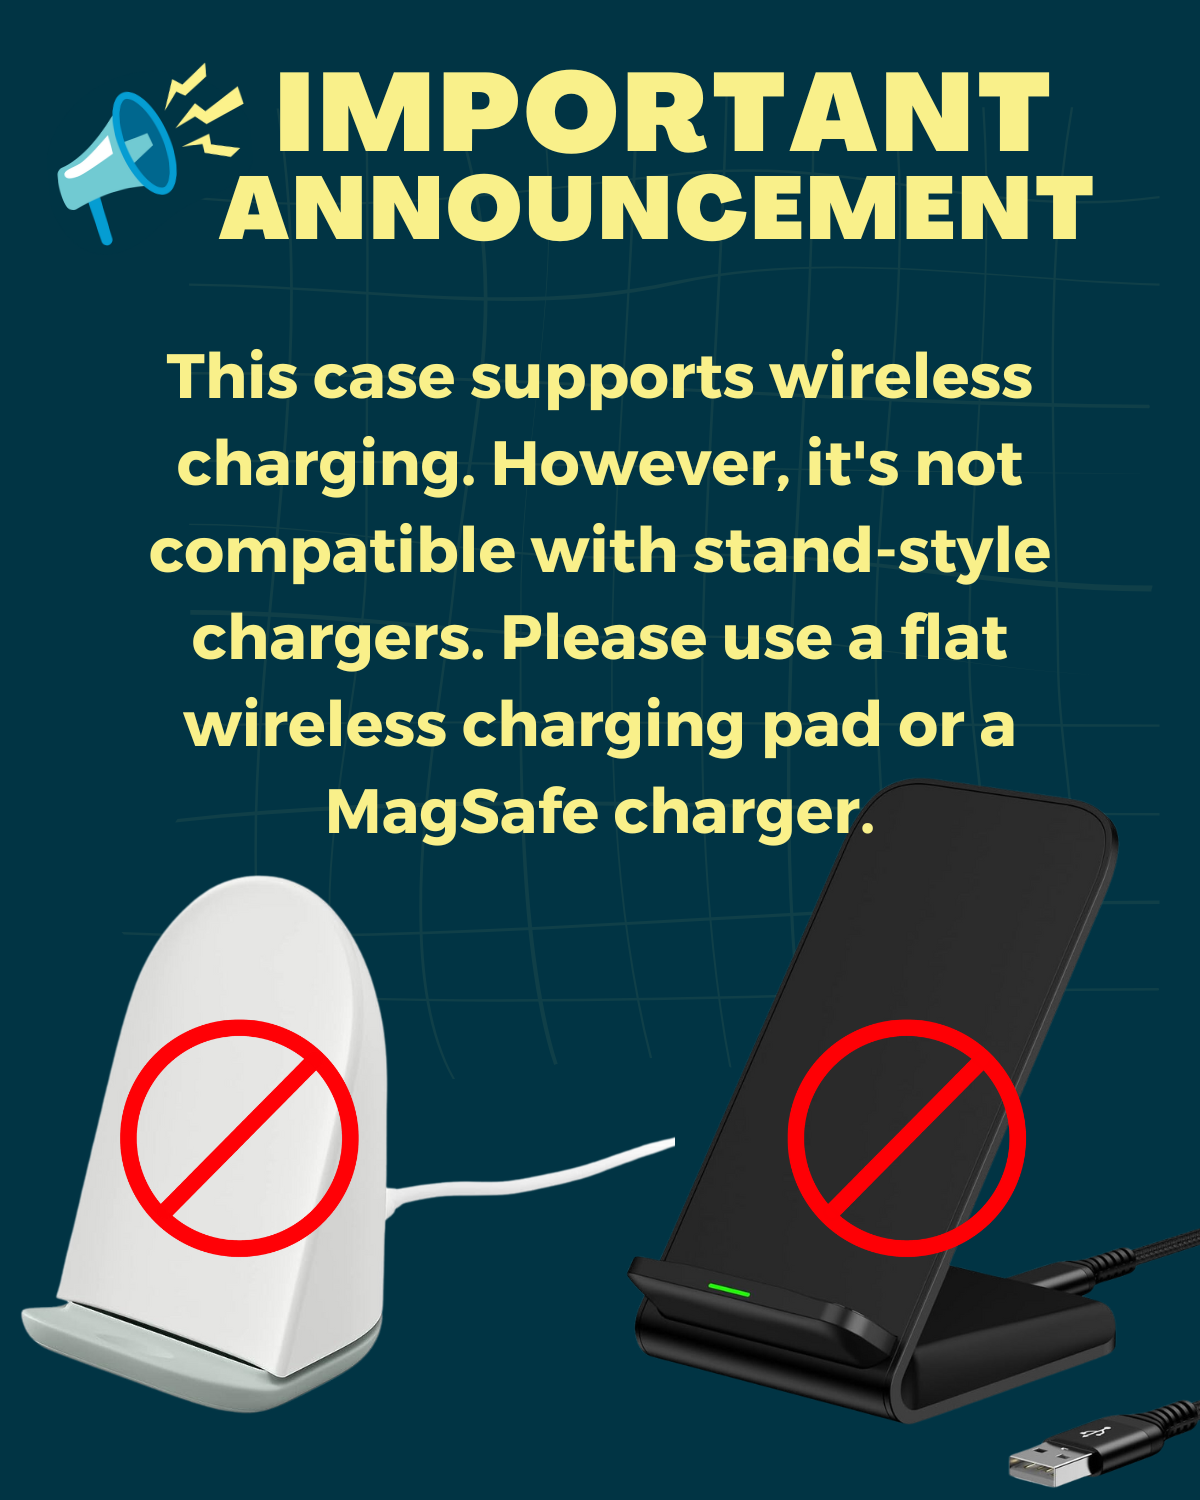 warning about wireless charging compatibility